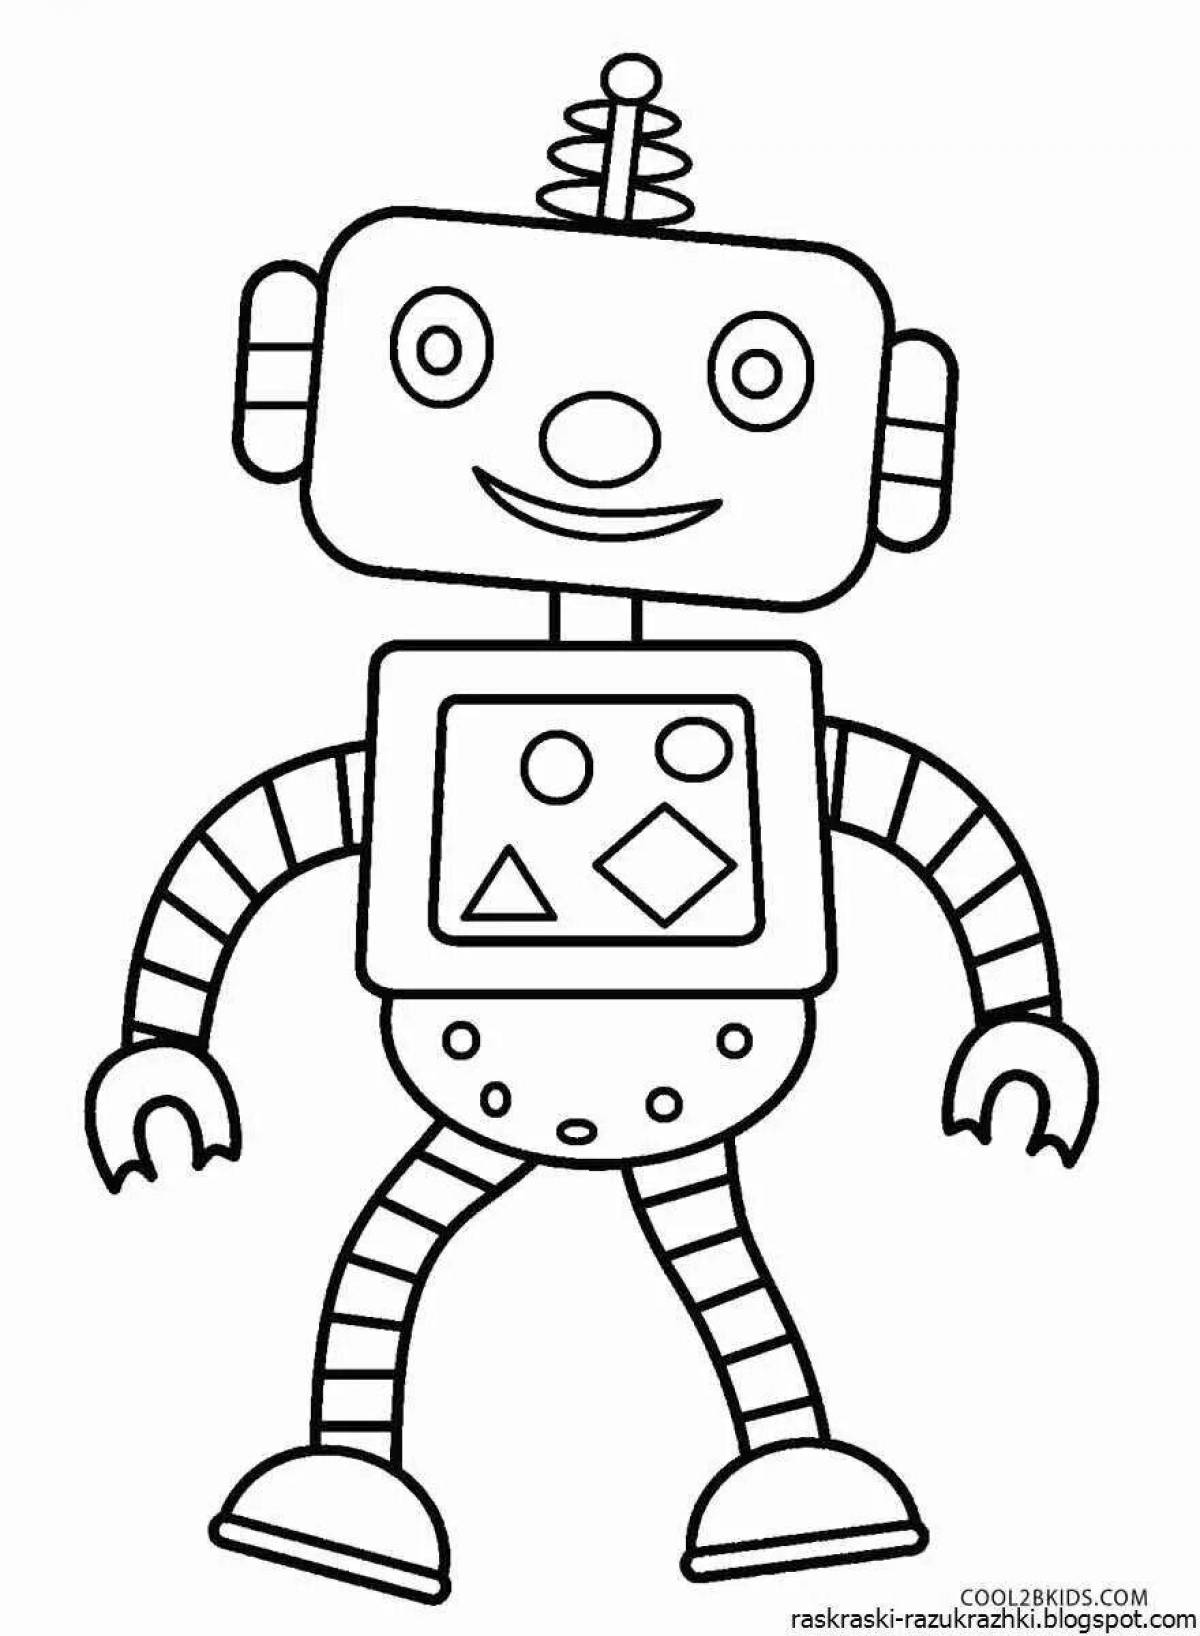 Intriguing coloring robots for boys 5-6 years old